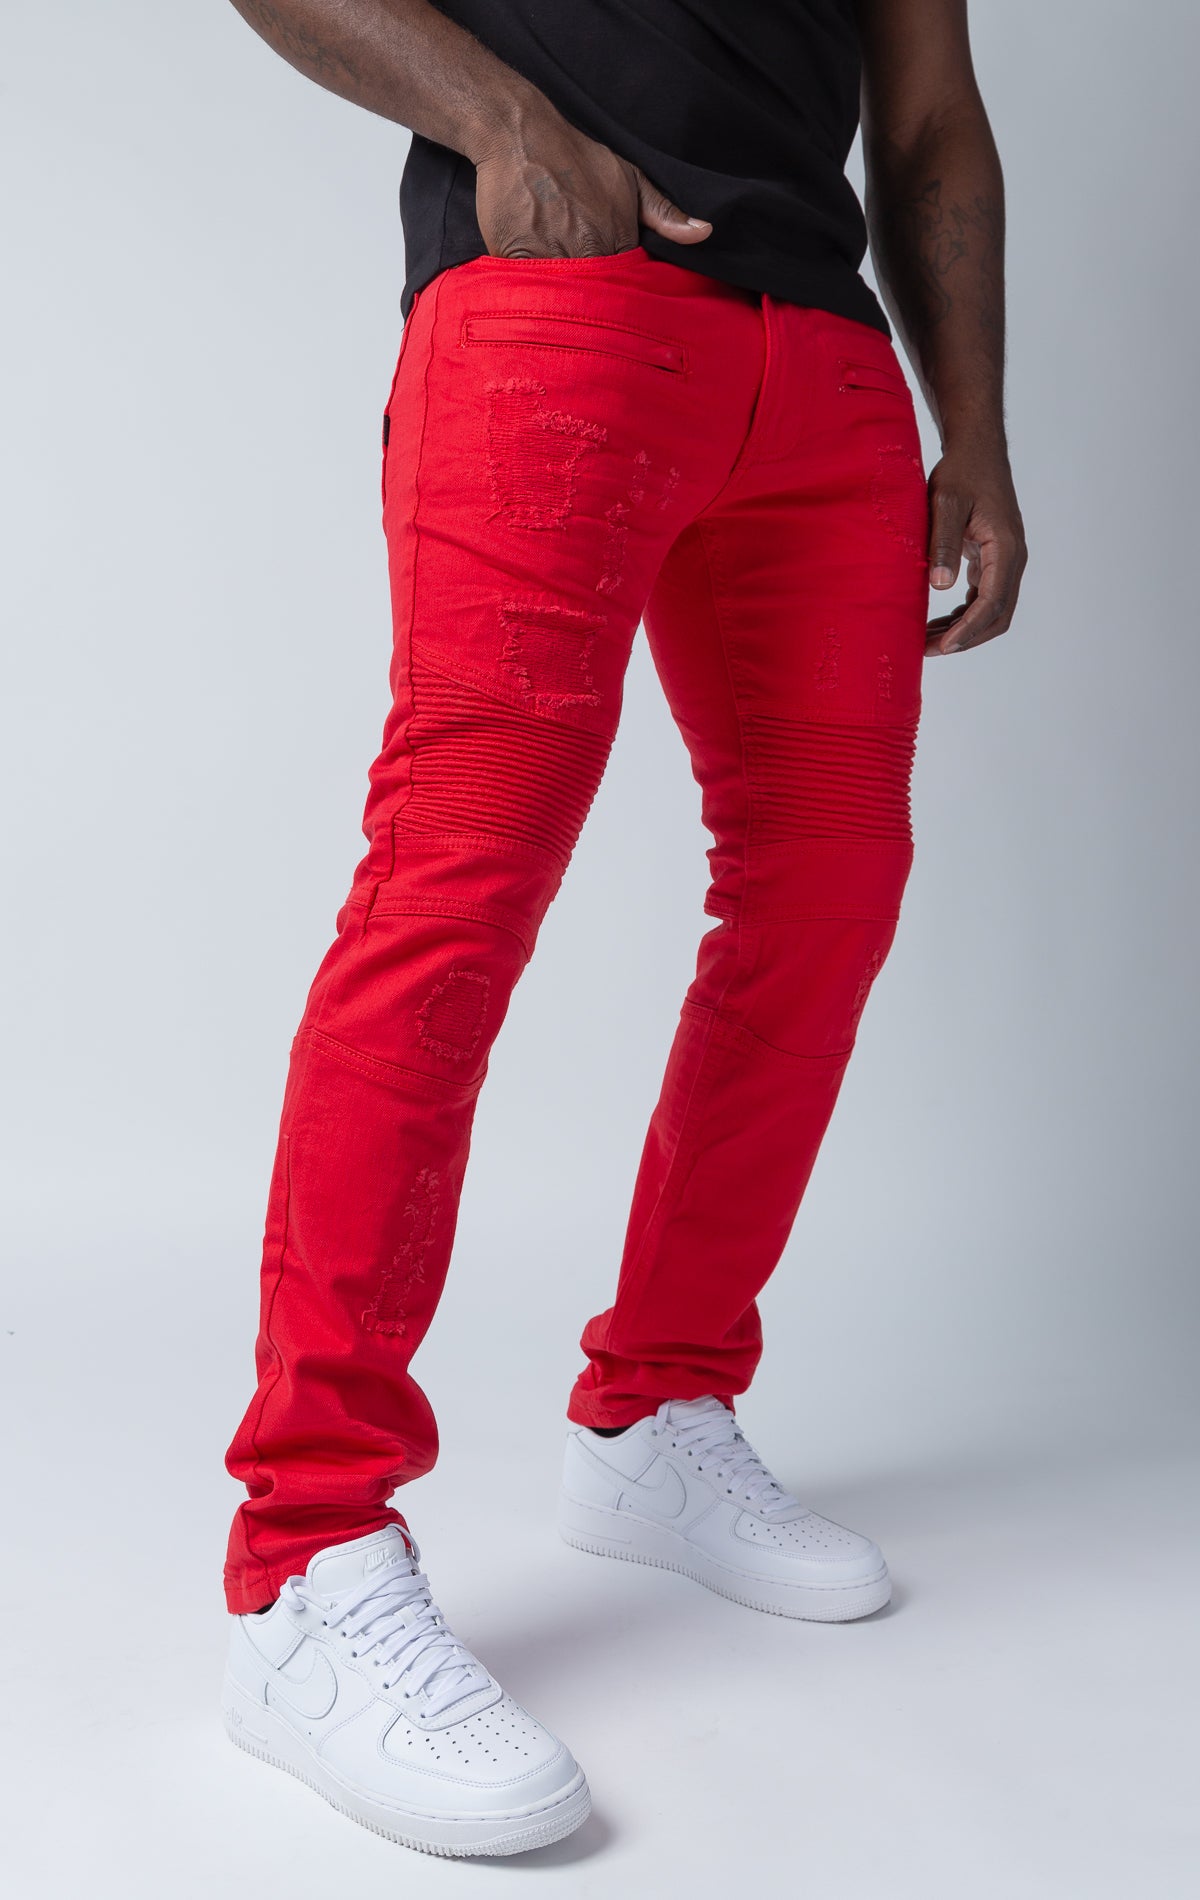 Red high-quality denim made from 98% cotton and 2% spandex. With its rip and repair design and slim fit, it's the ultimate blend of style and comfort.